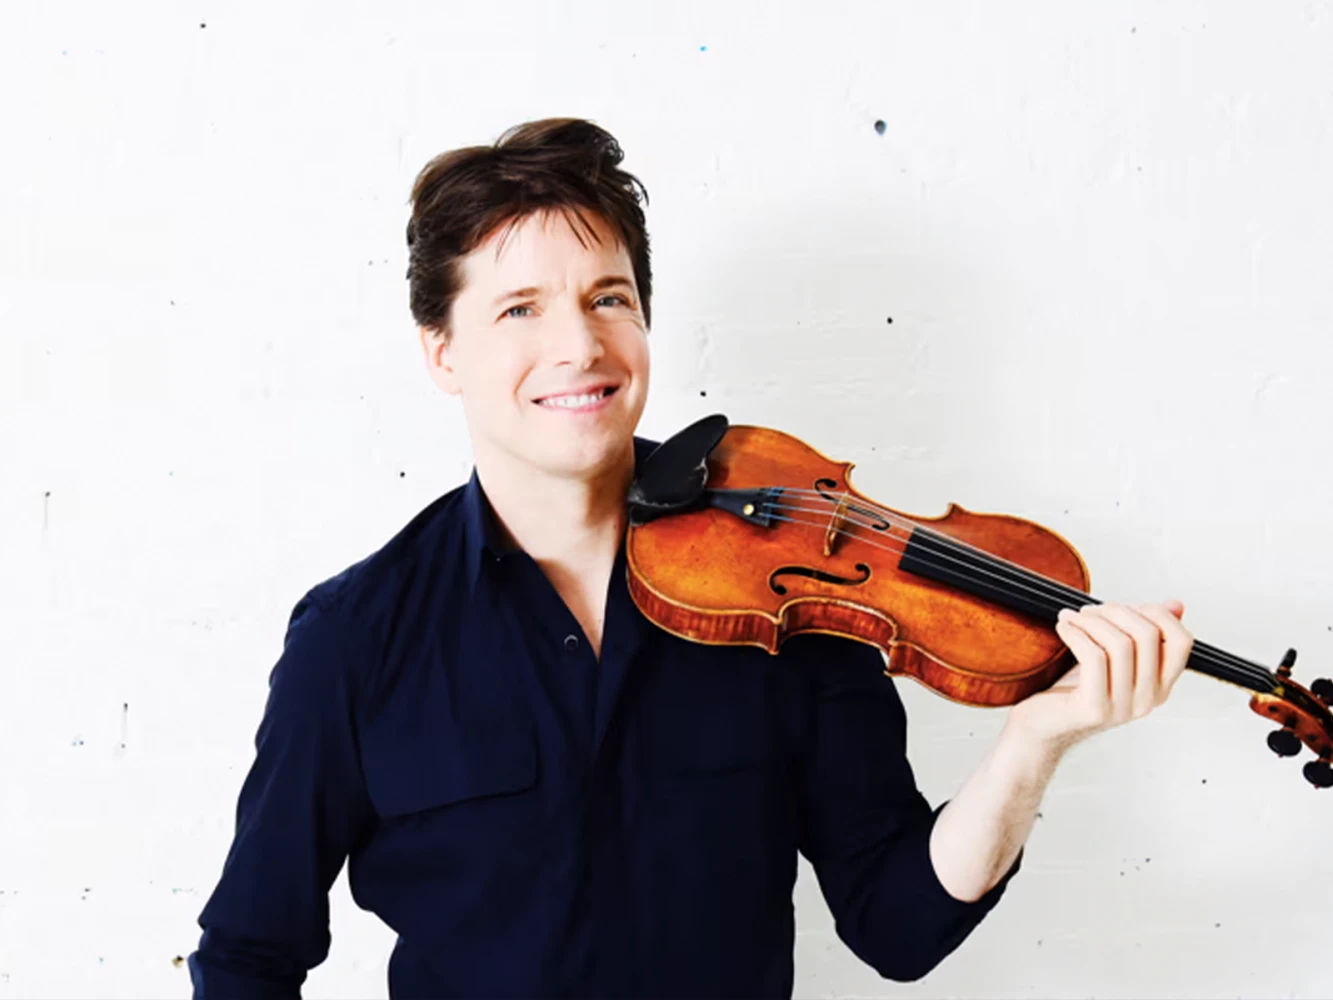 The Elements with Joshua Bell: What to expect - 1